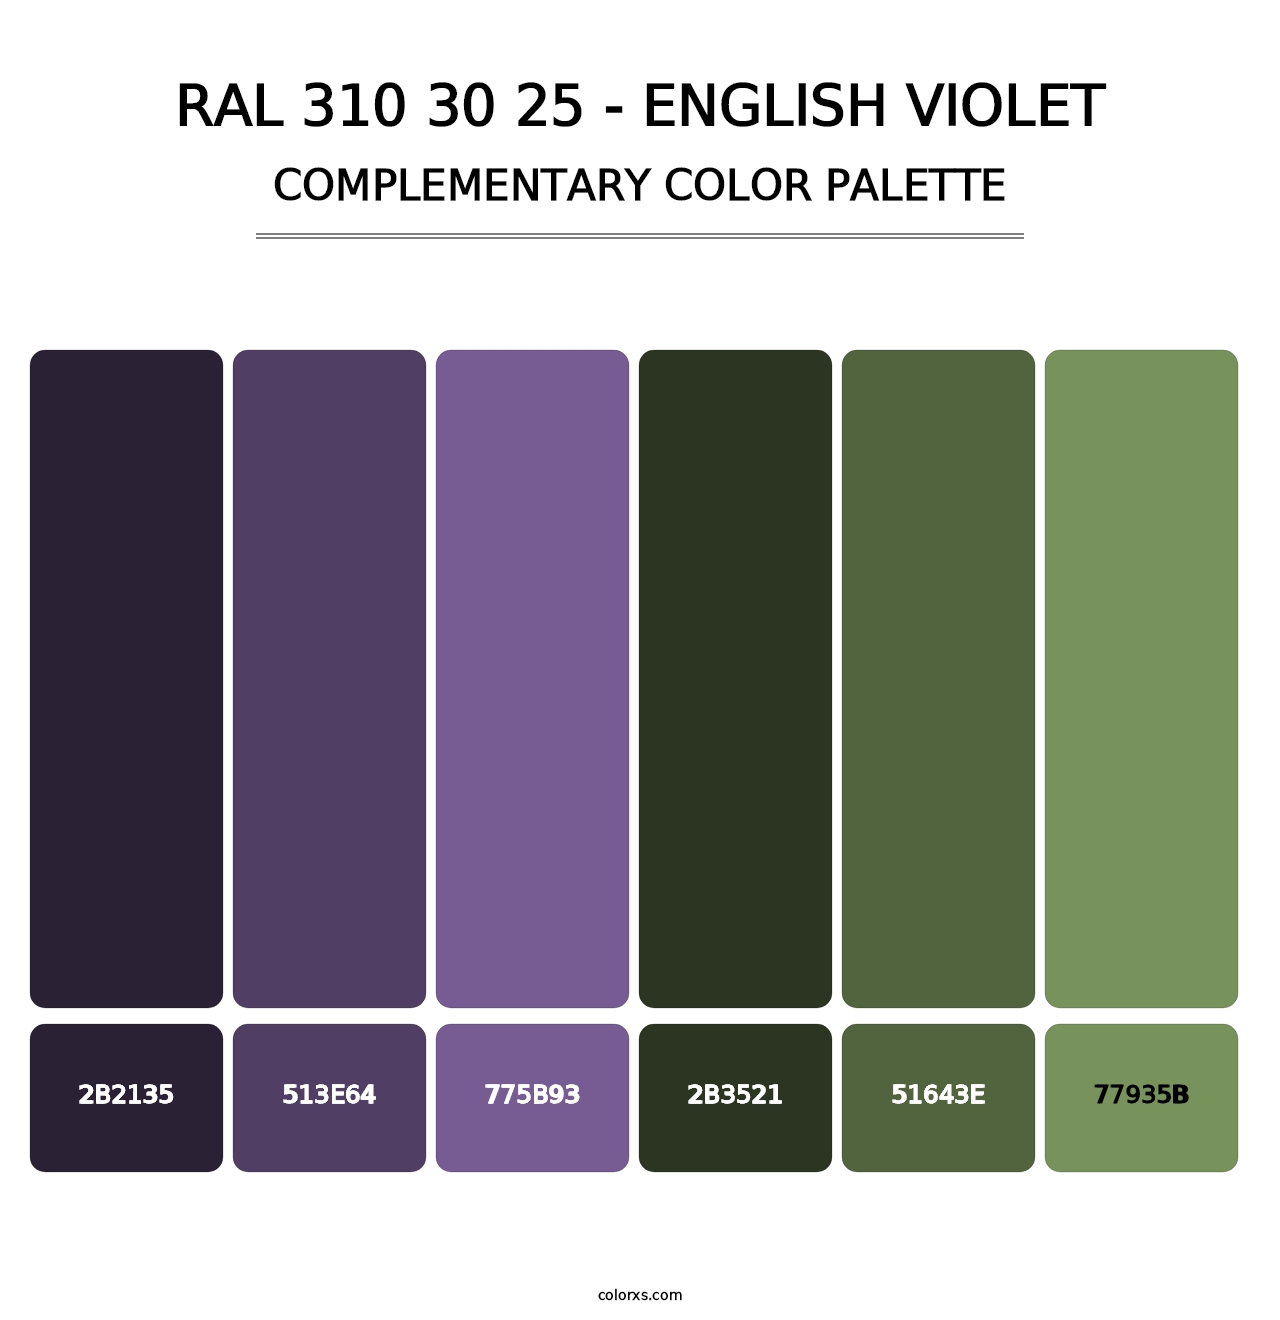 RAL 310 30 25 - English Violet - Complementary Color Palette